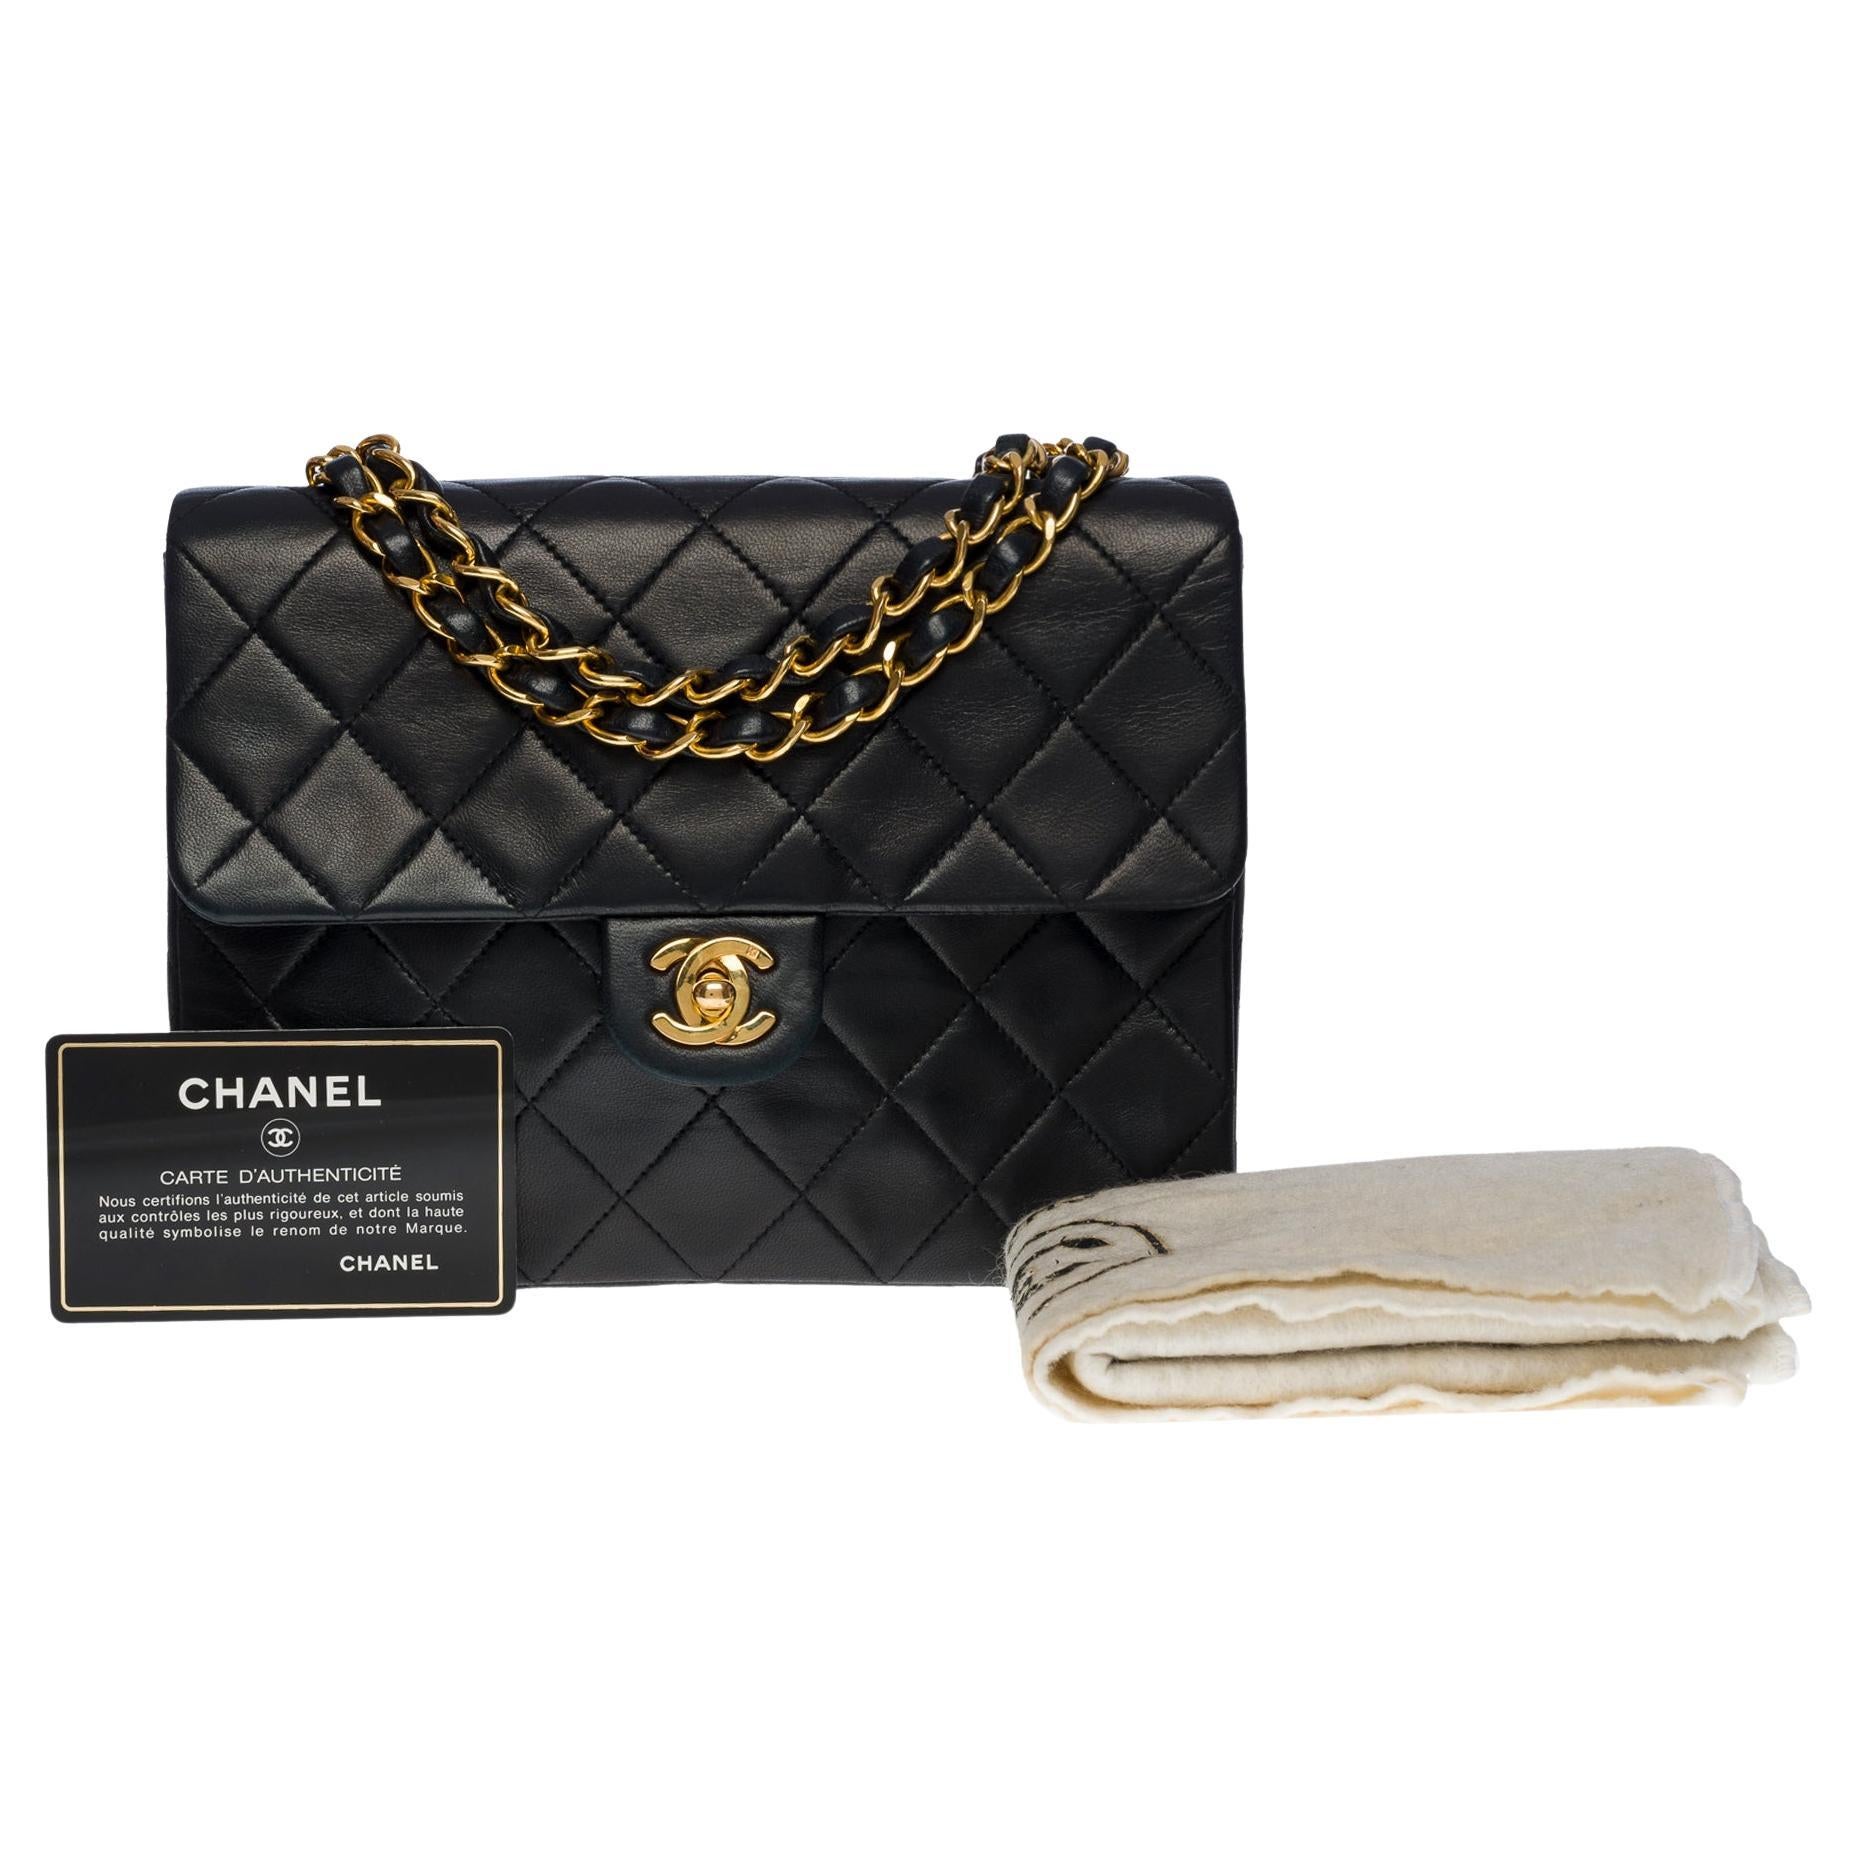 Chanel Timeless Mini Square Flap shoulder bag in black quilted lambskin, GHW